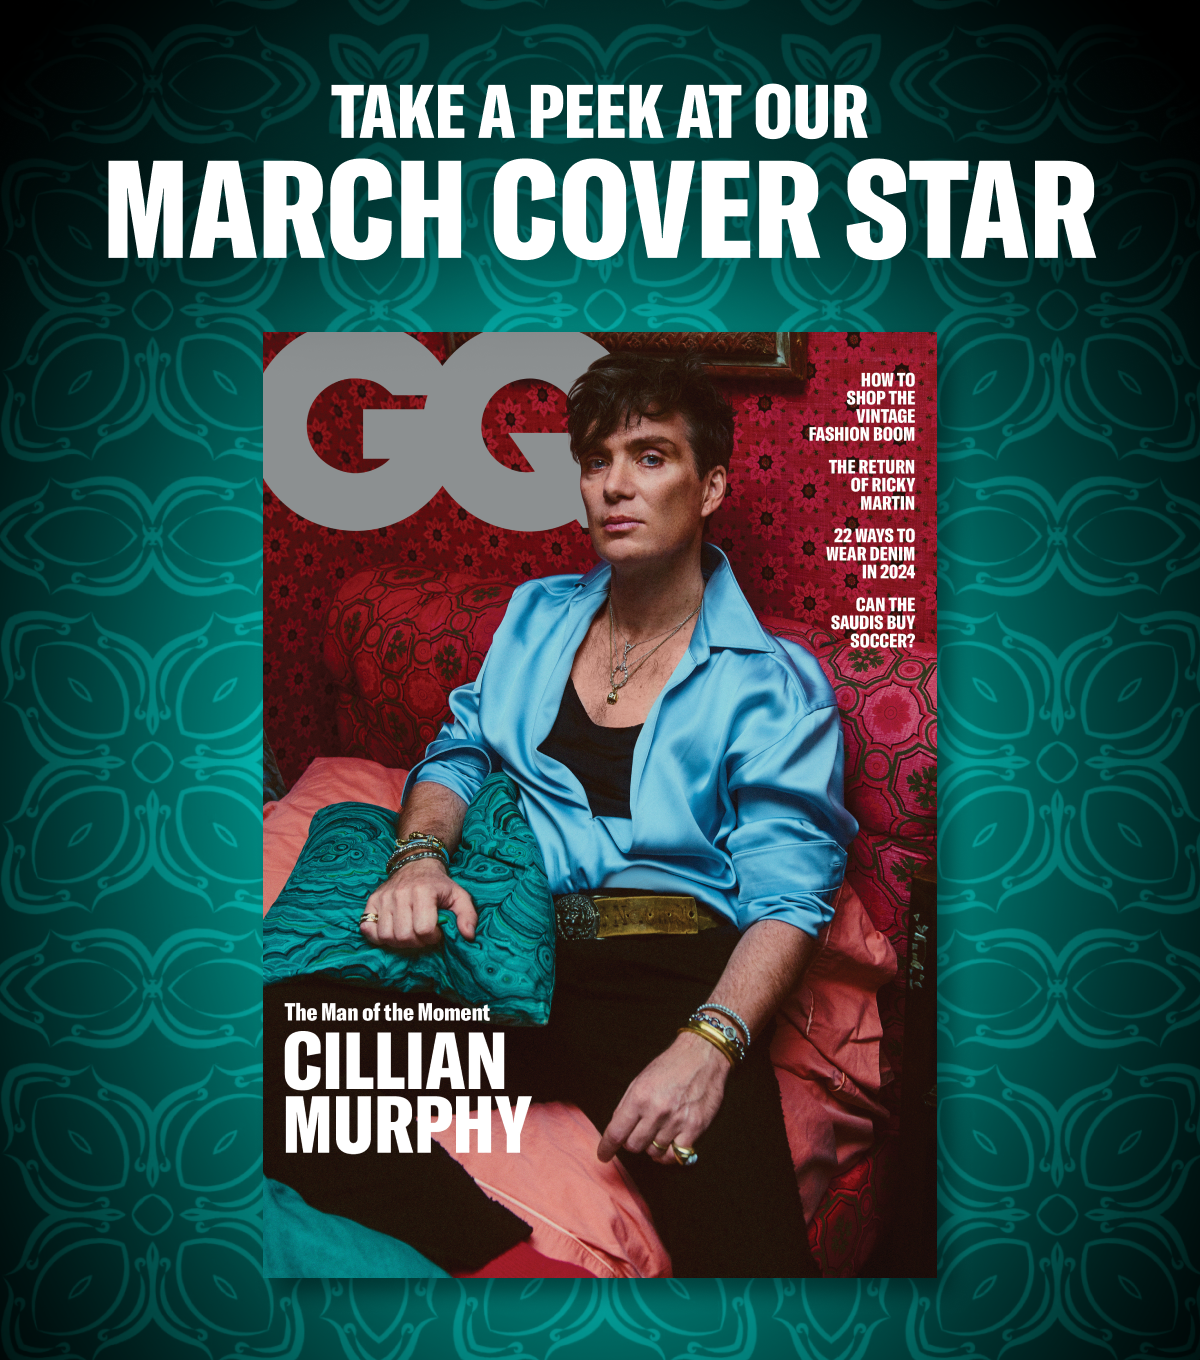 Take a peek at our March cover star.